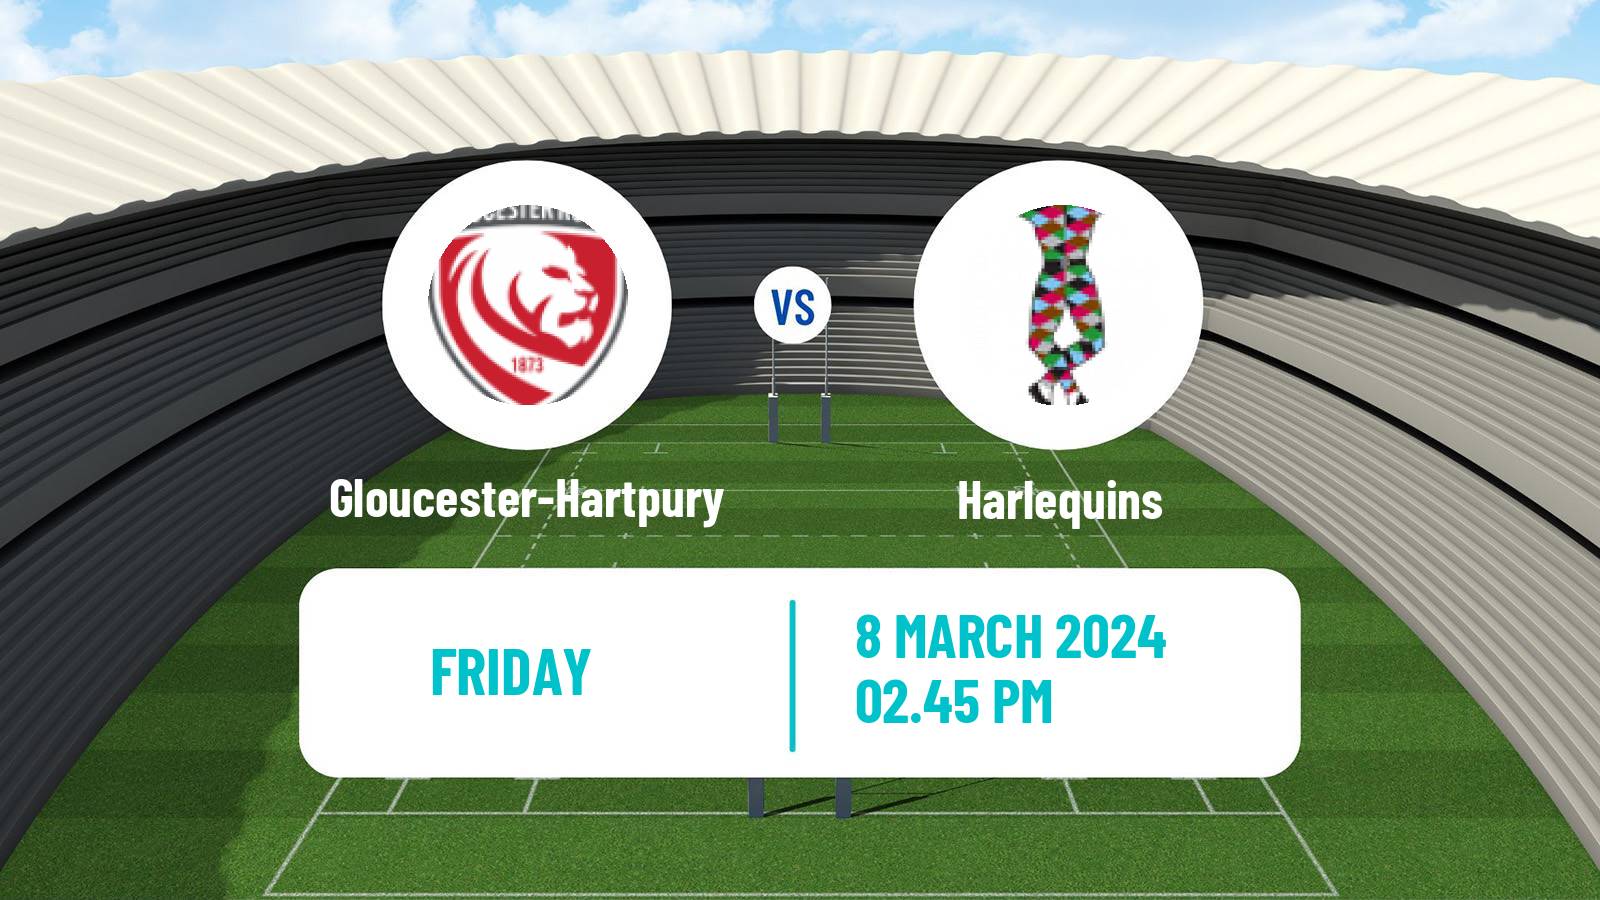 Rugby union English Premier 15s Rugby Women Gloucester-Hartpury - Harlequins